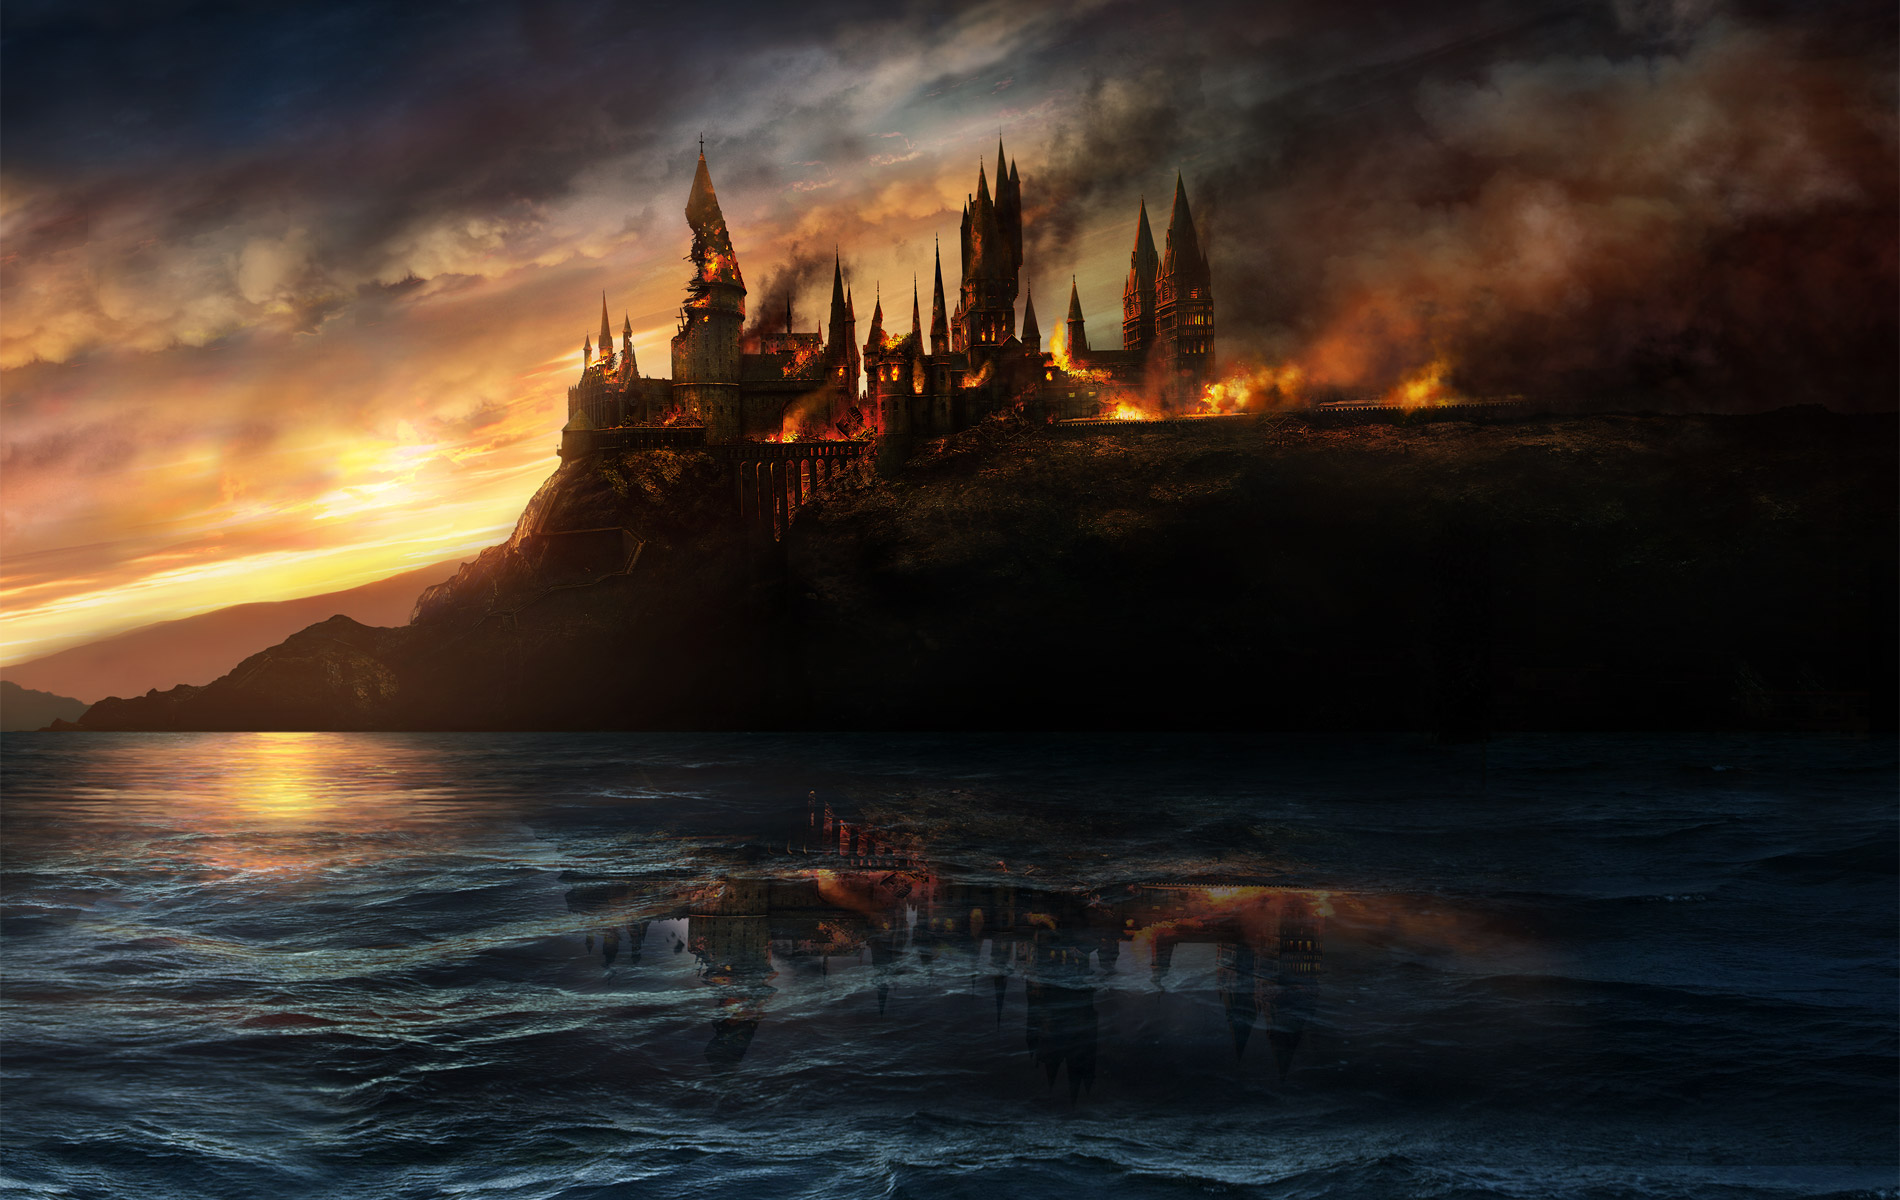 The Harry Potter Movies: The Triumphant Battle of Hogwarts 2